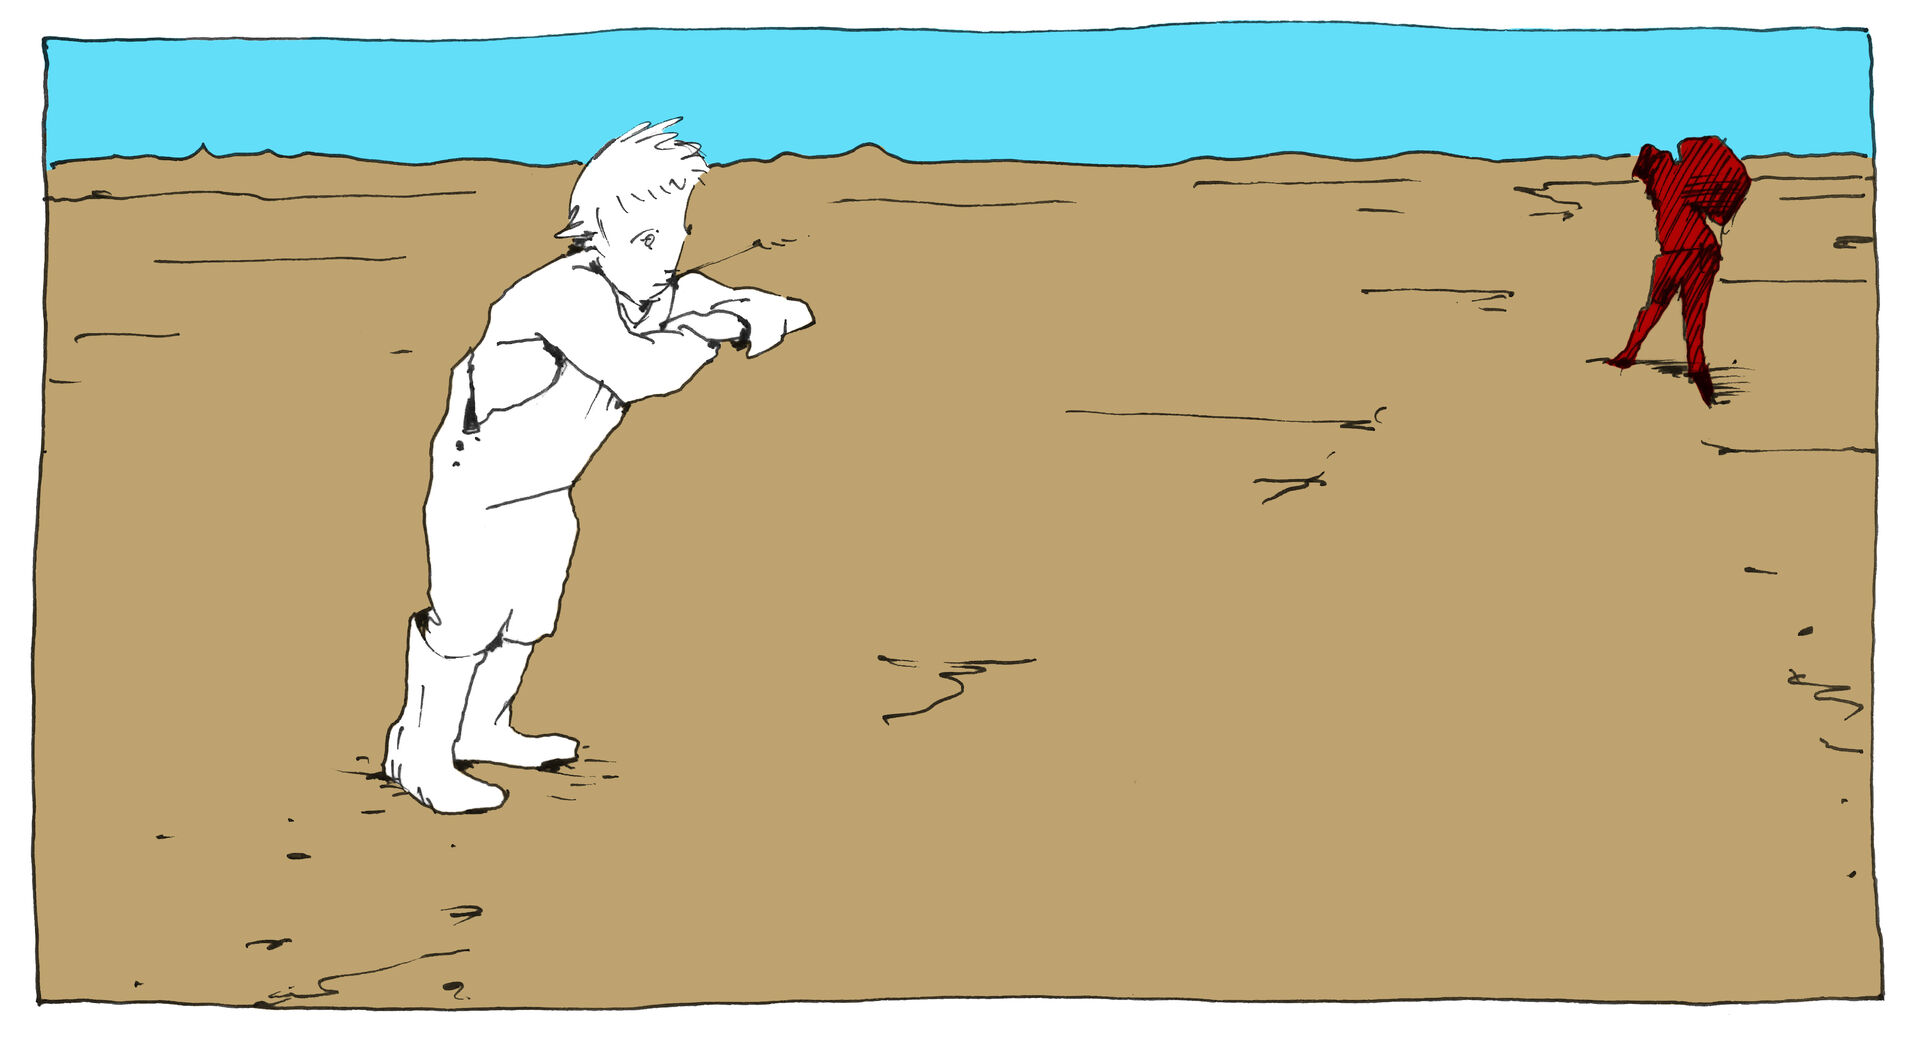 Drawing by Kari Korolainen of man leaning on an invisible fence, with border-crosser with backpack in the background.